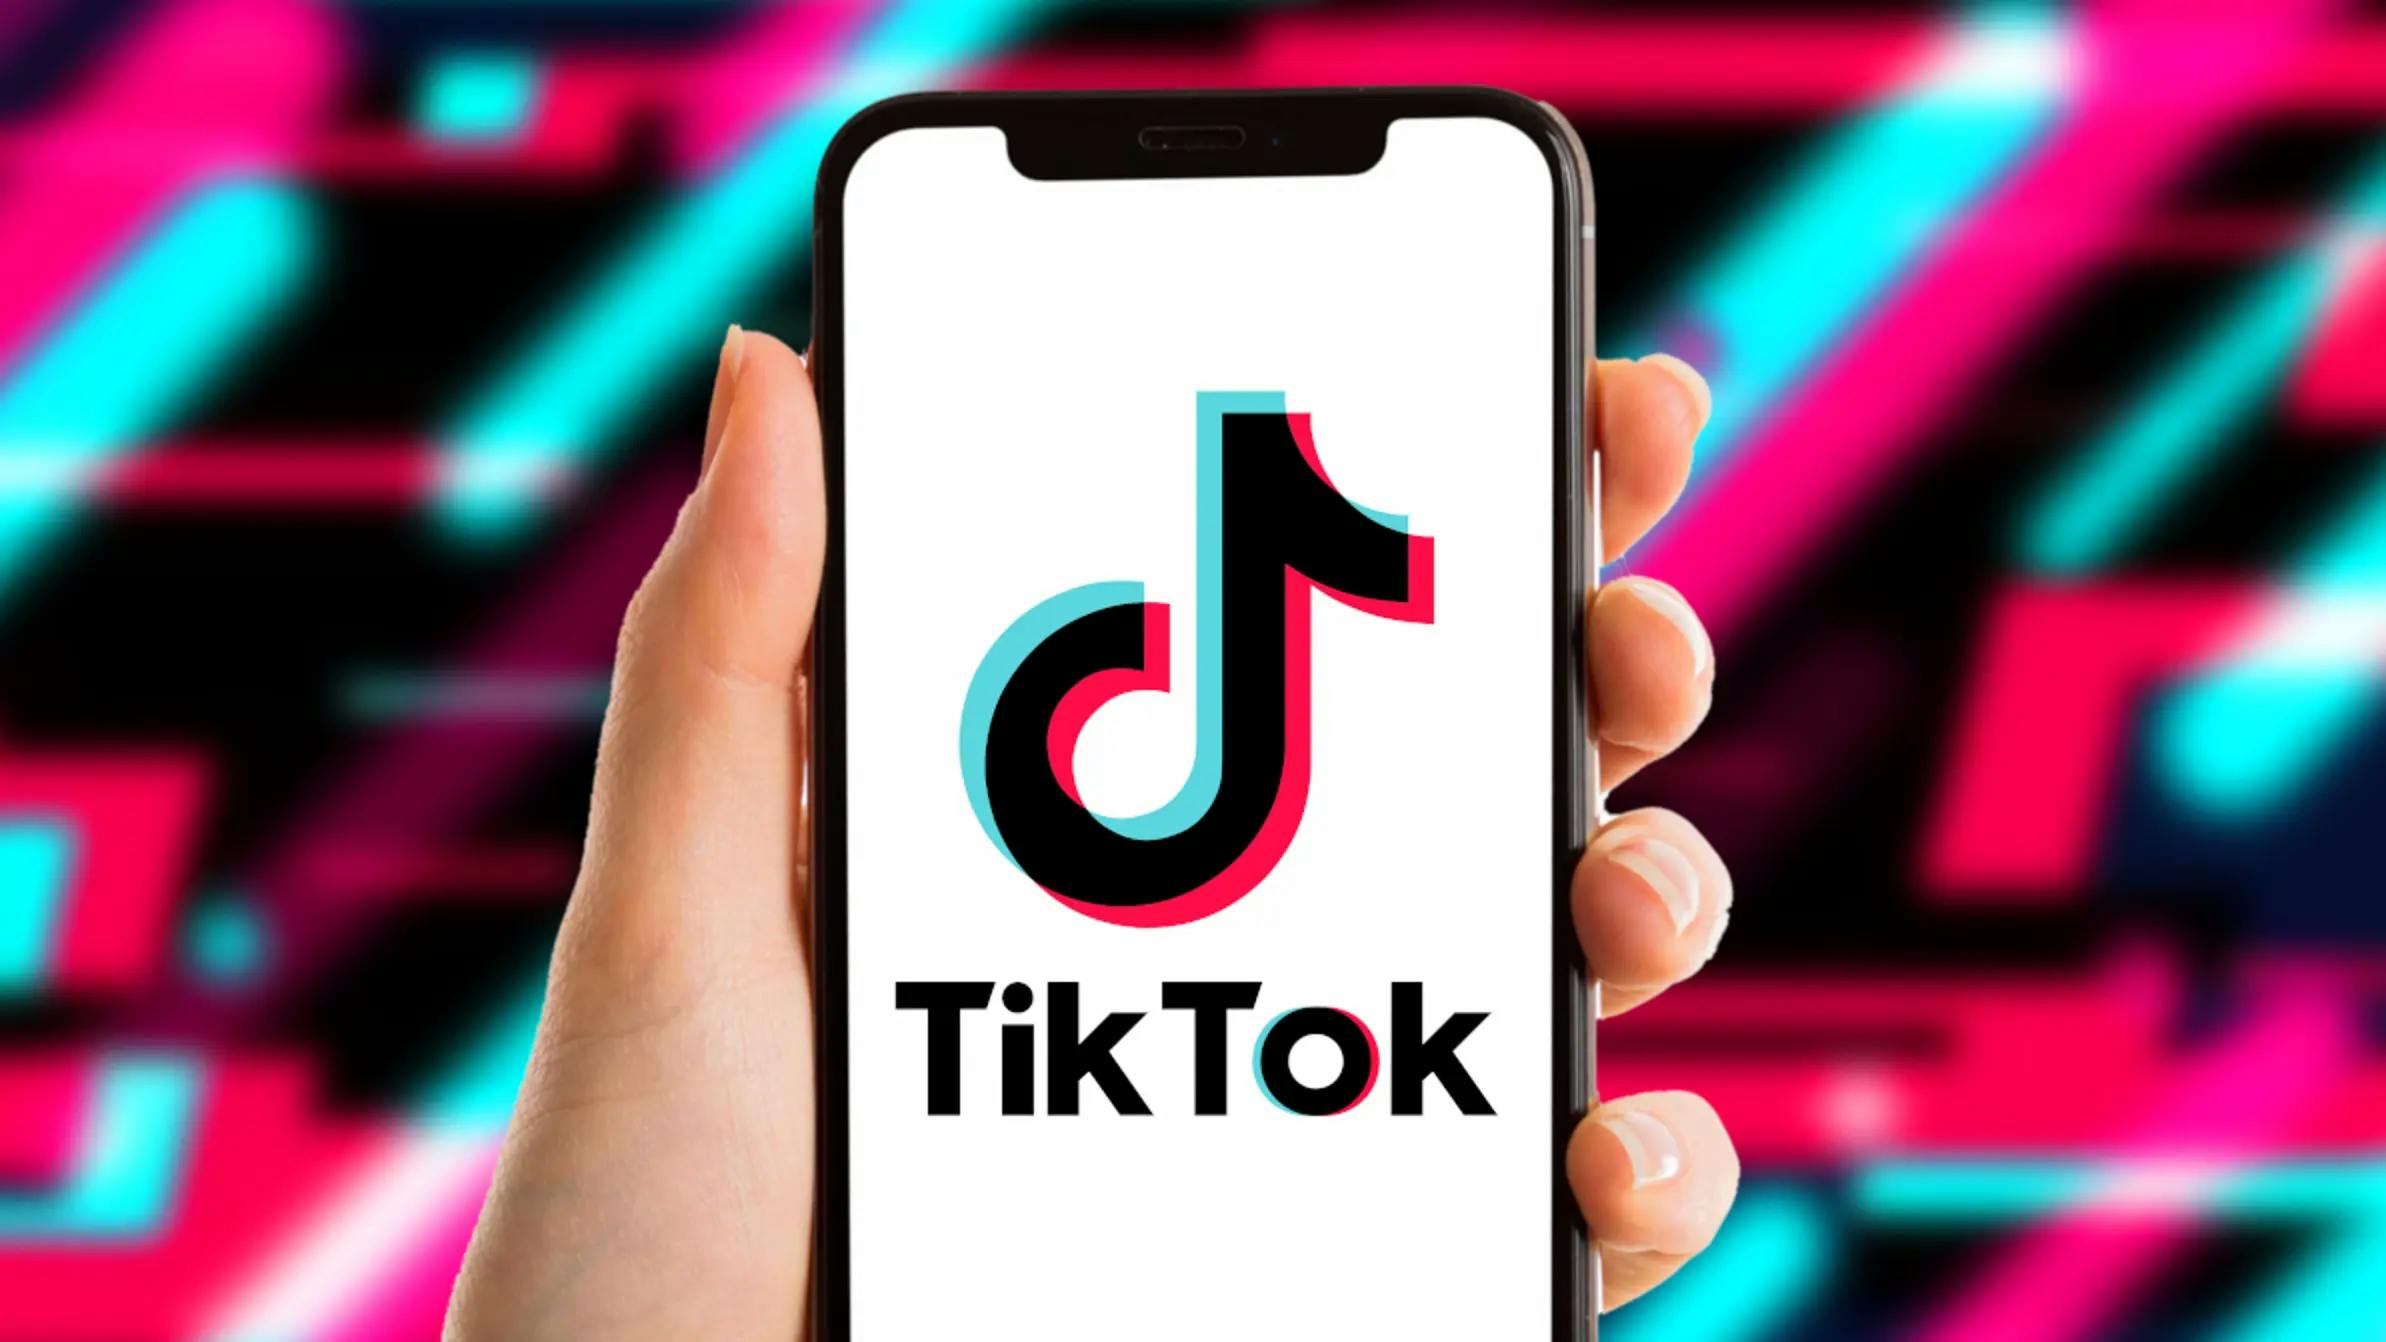 TikTok Launches TikTok Now: An Inspired Feature Promoting Authenticity